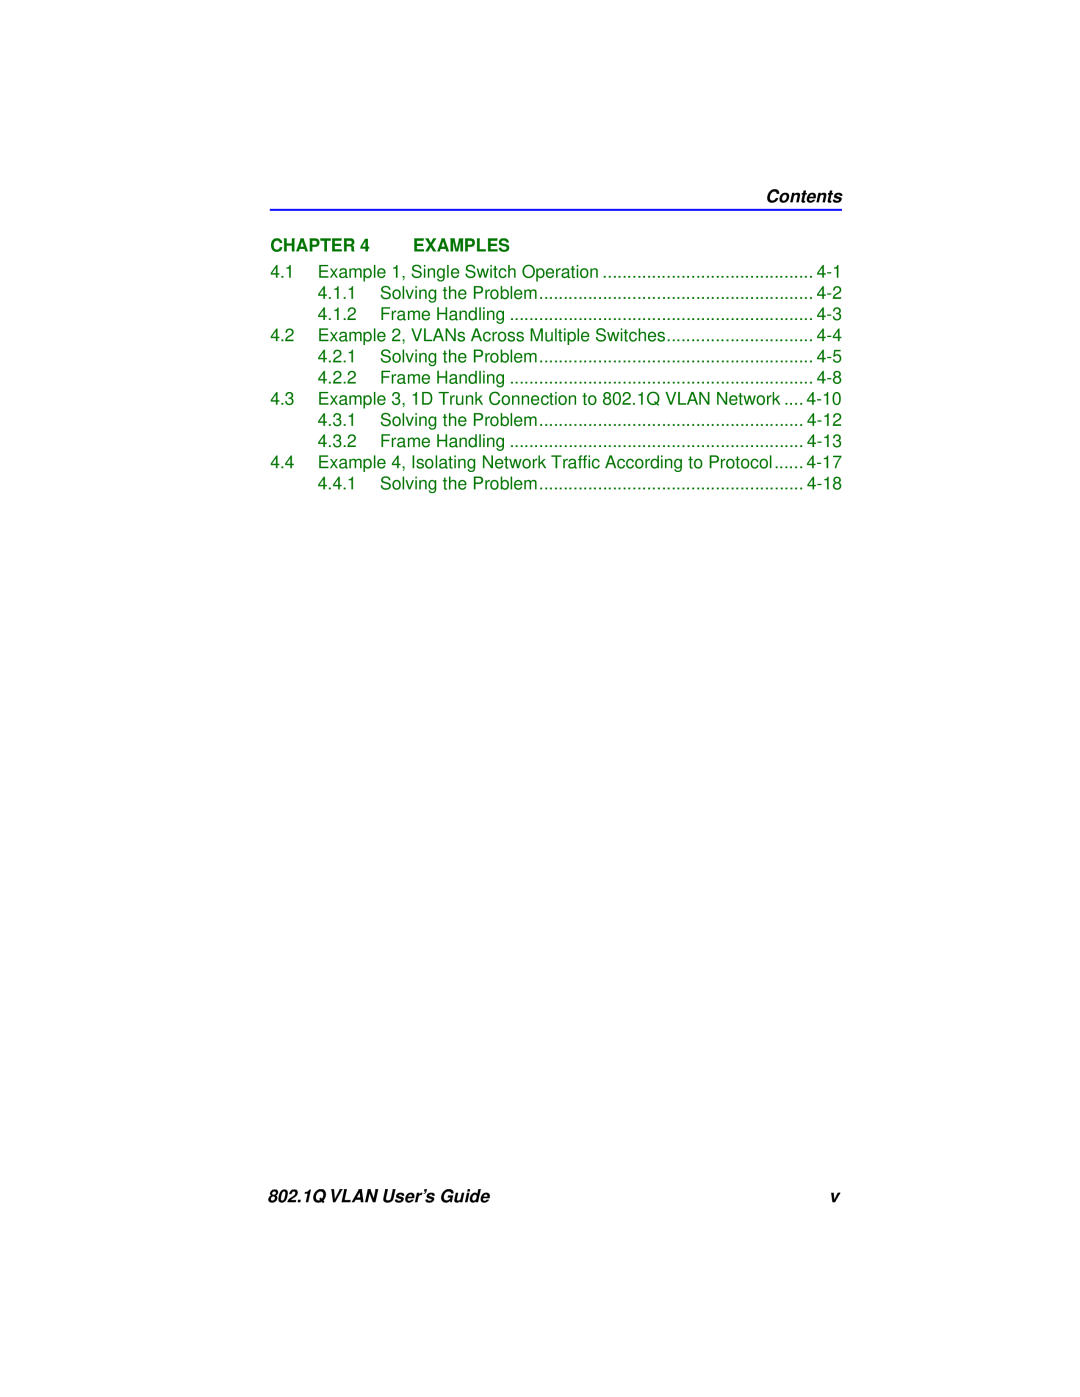 Cabletron Systems manual Contents, Chapter, Examples, 802.1Q VLAN User’s Guide 